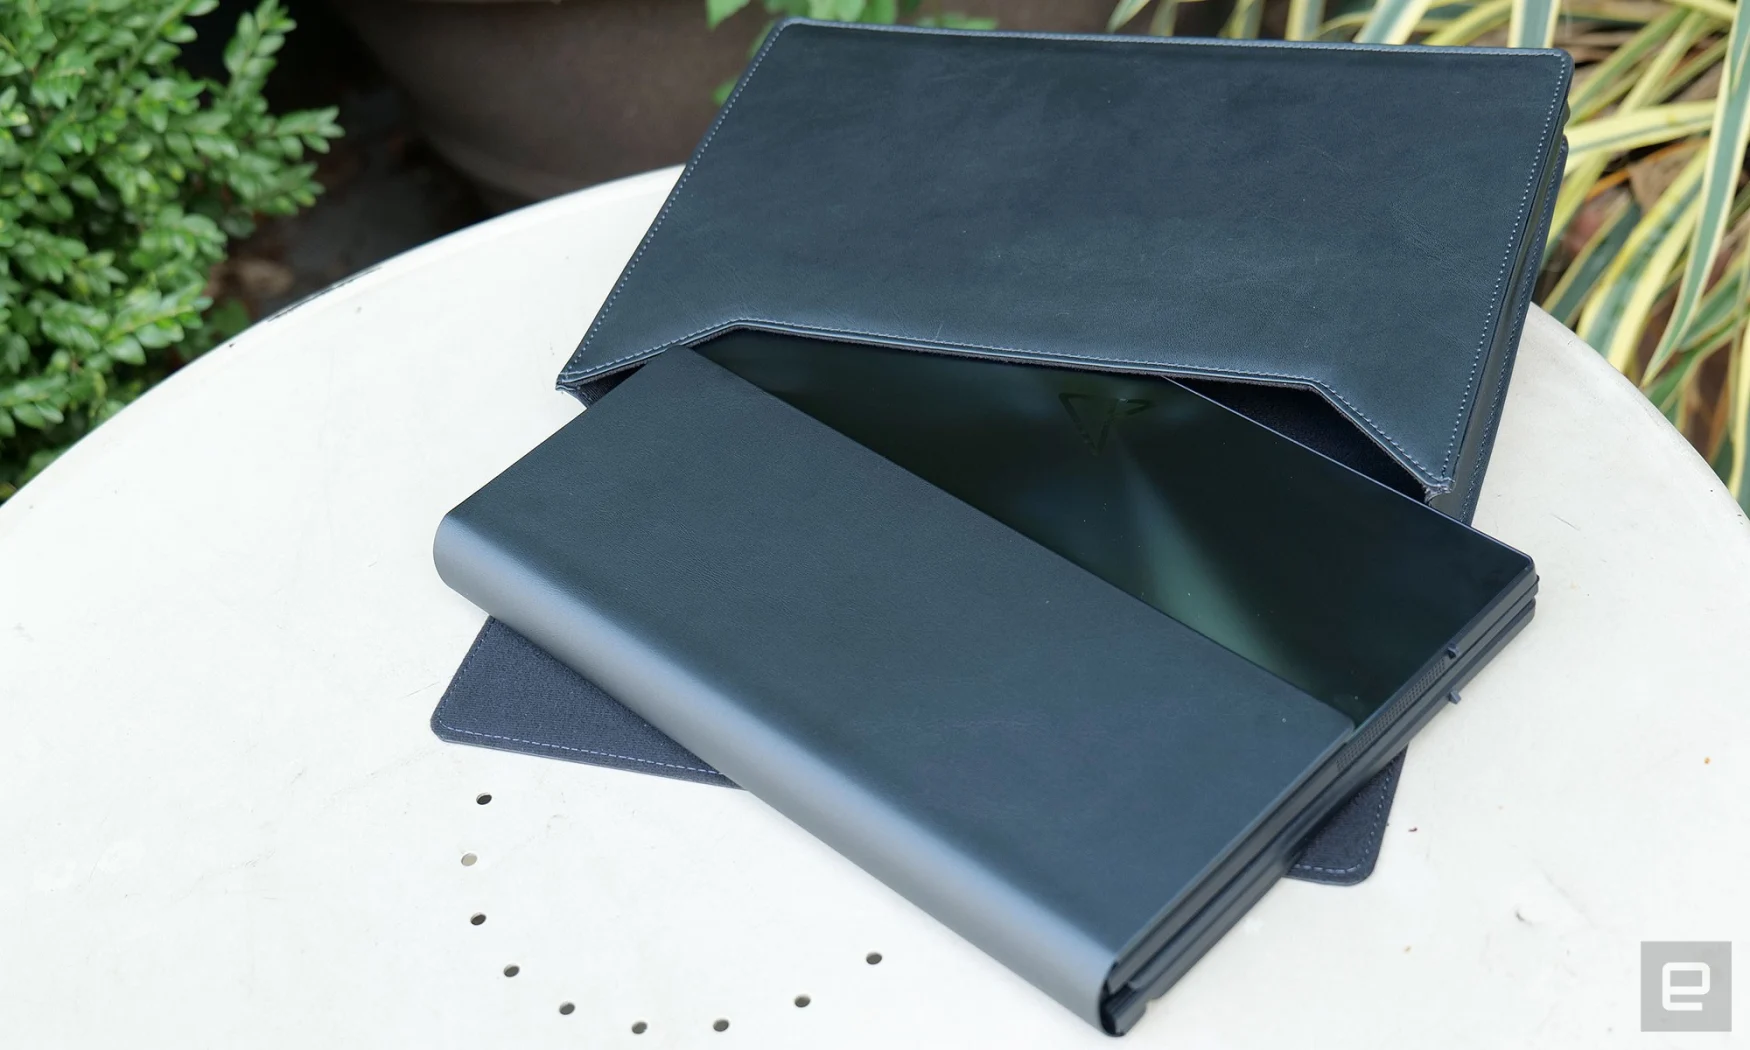 Asus' bundled leather case is a thoughtful inclusion that really helps protect the Zenbook 17 Fold while traveling. 